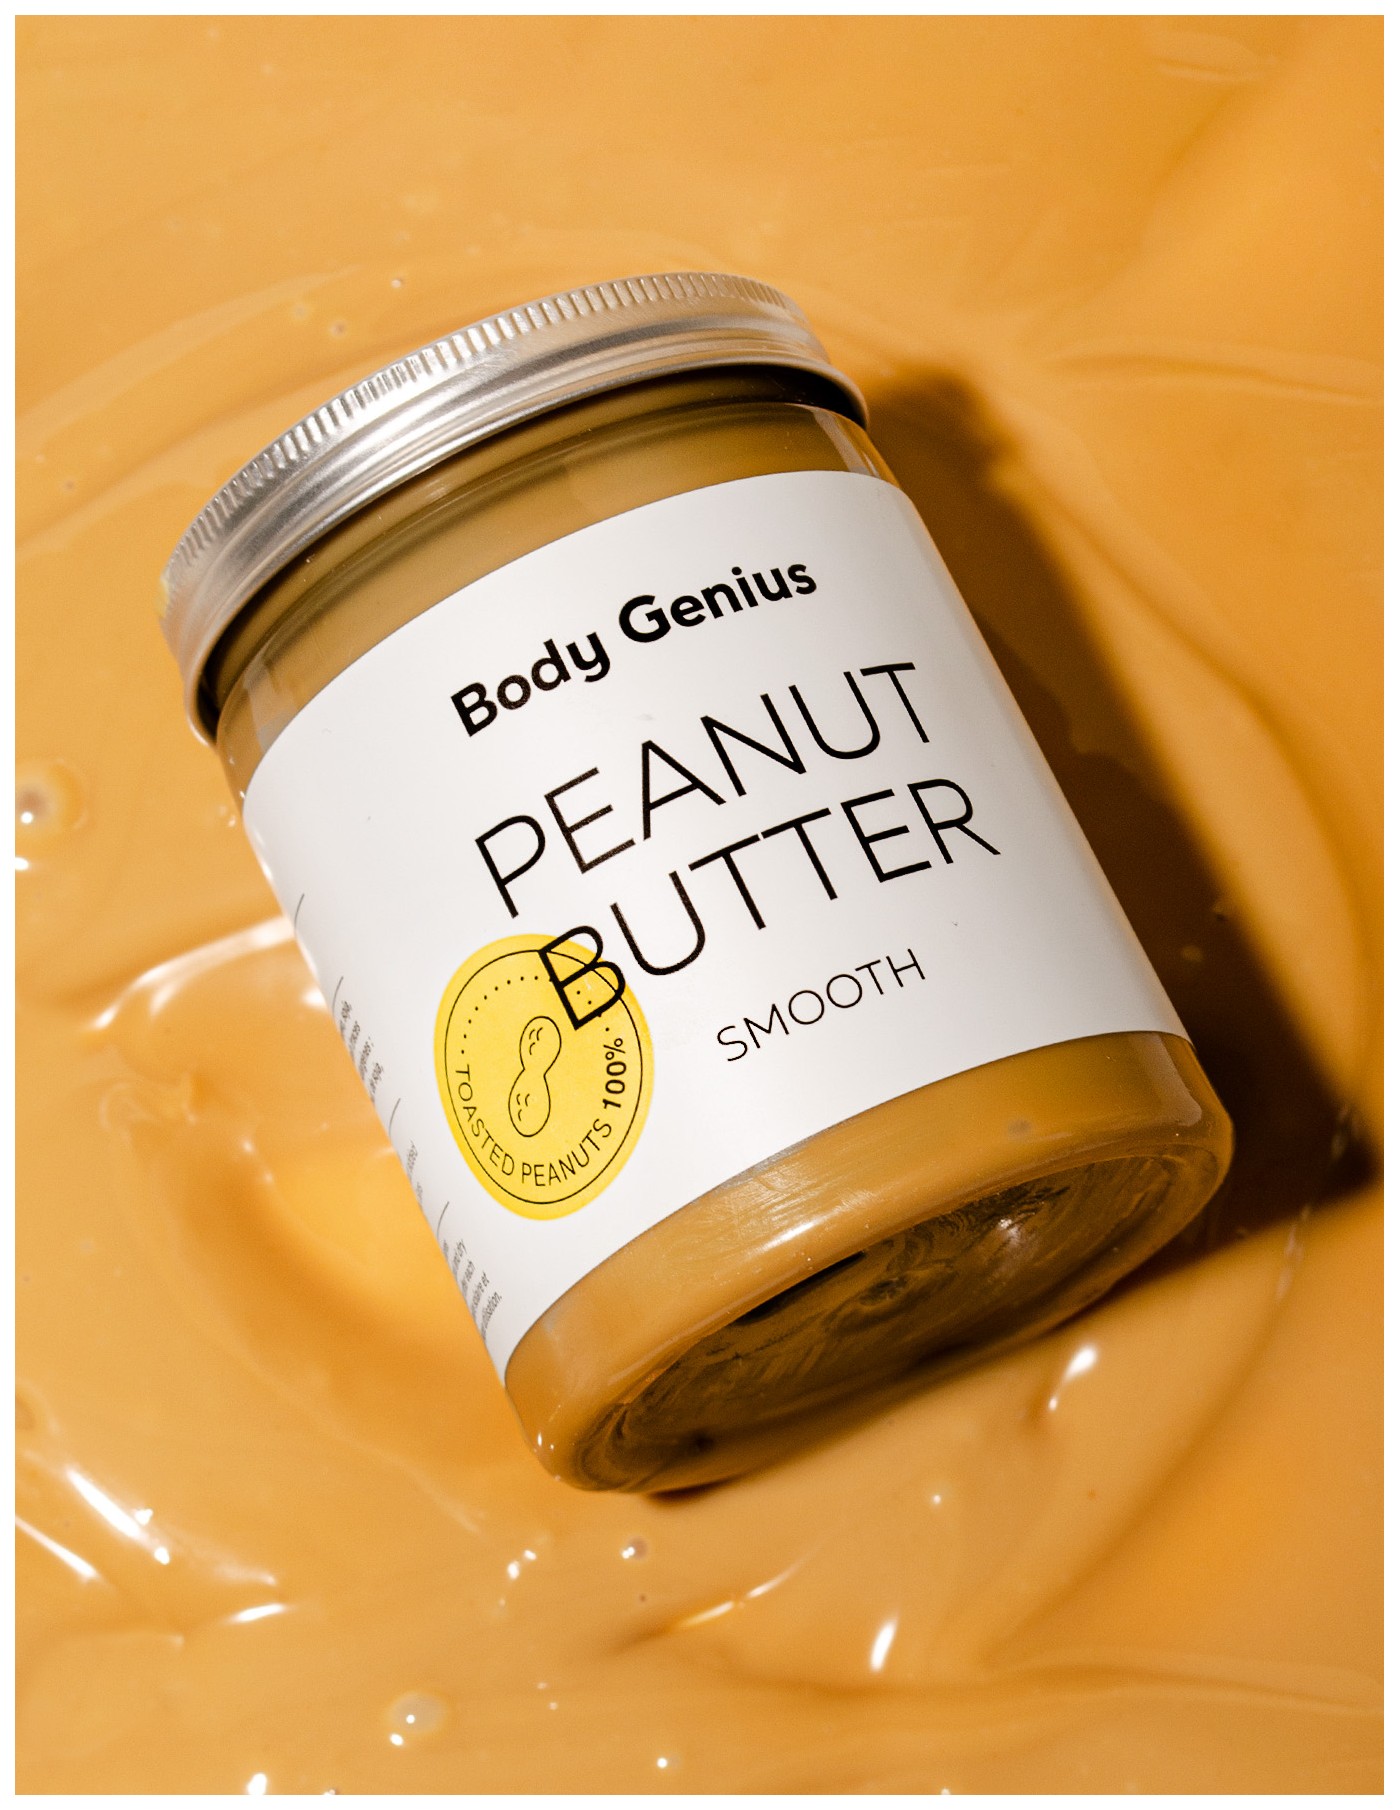 All-natural Peanut Butter by Body Genius